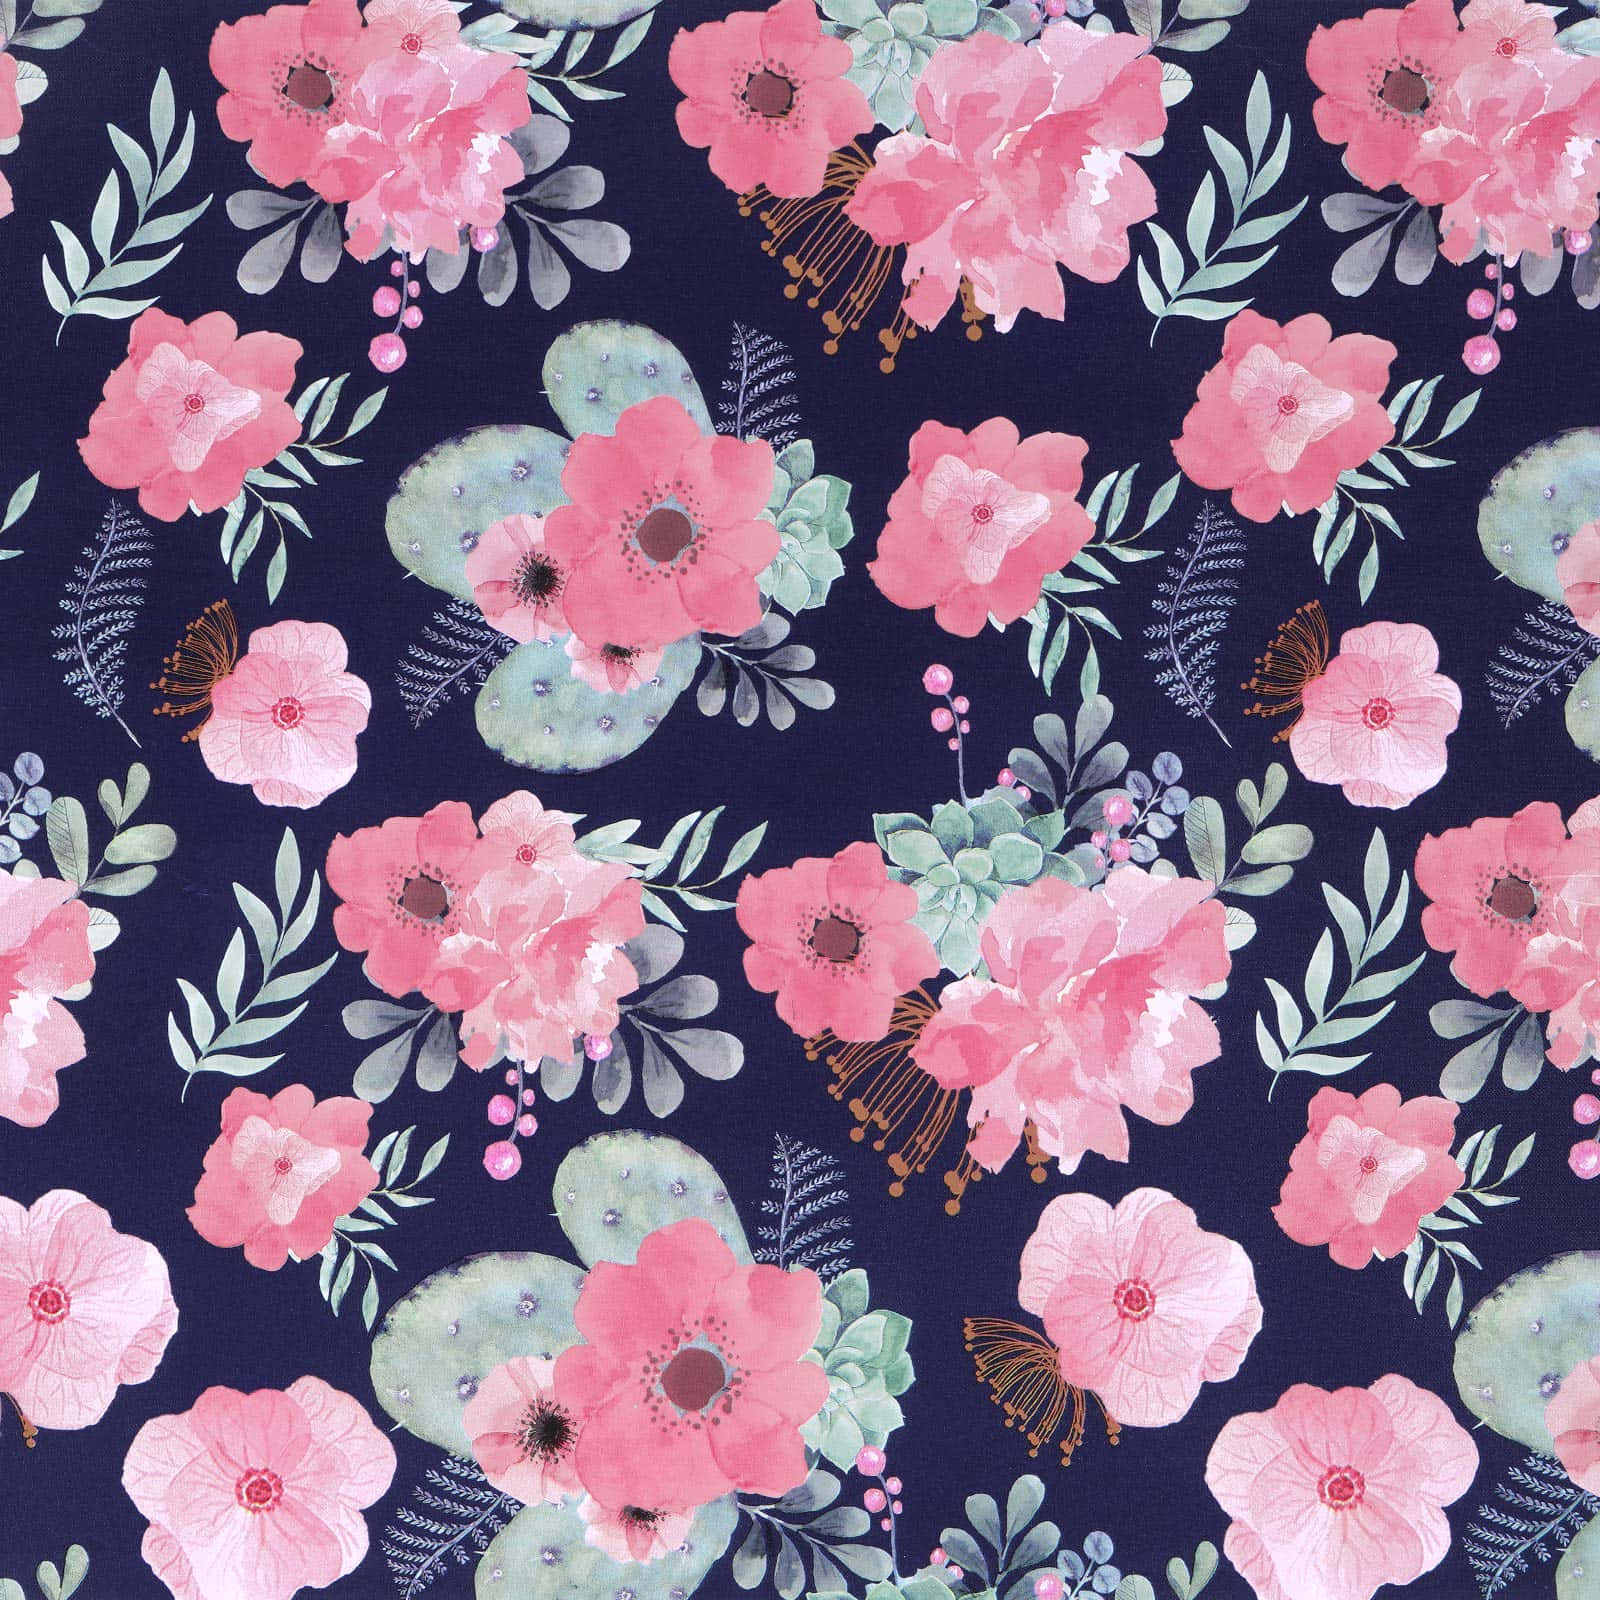 Pink And Blue Watercolor Floral Patterns Wallpaper